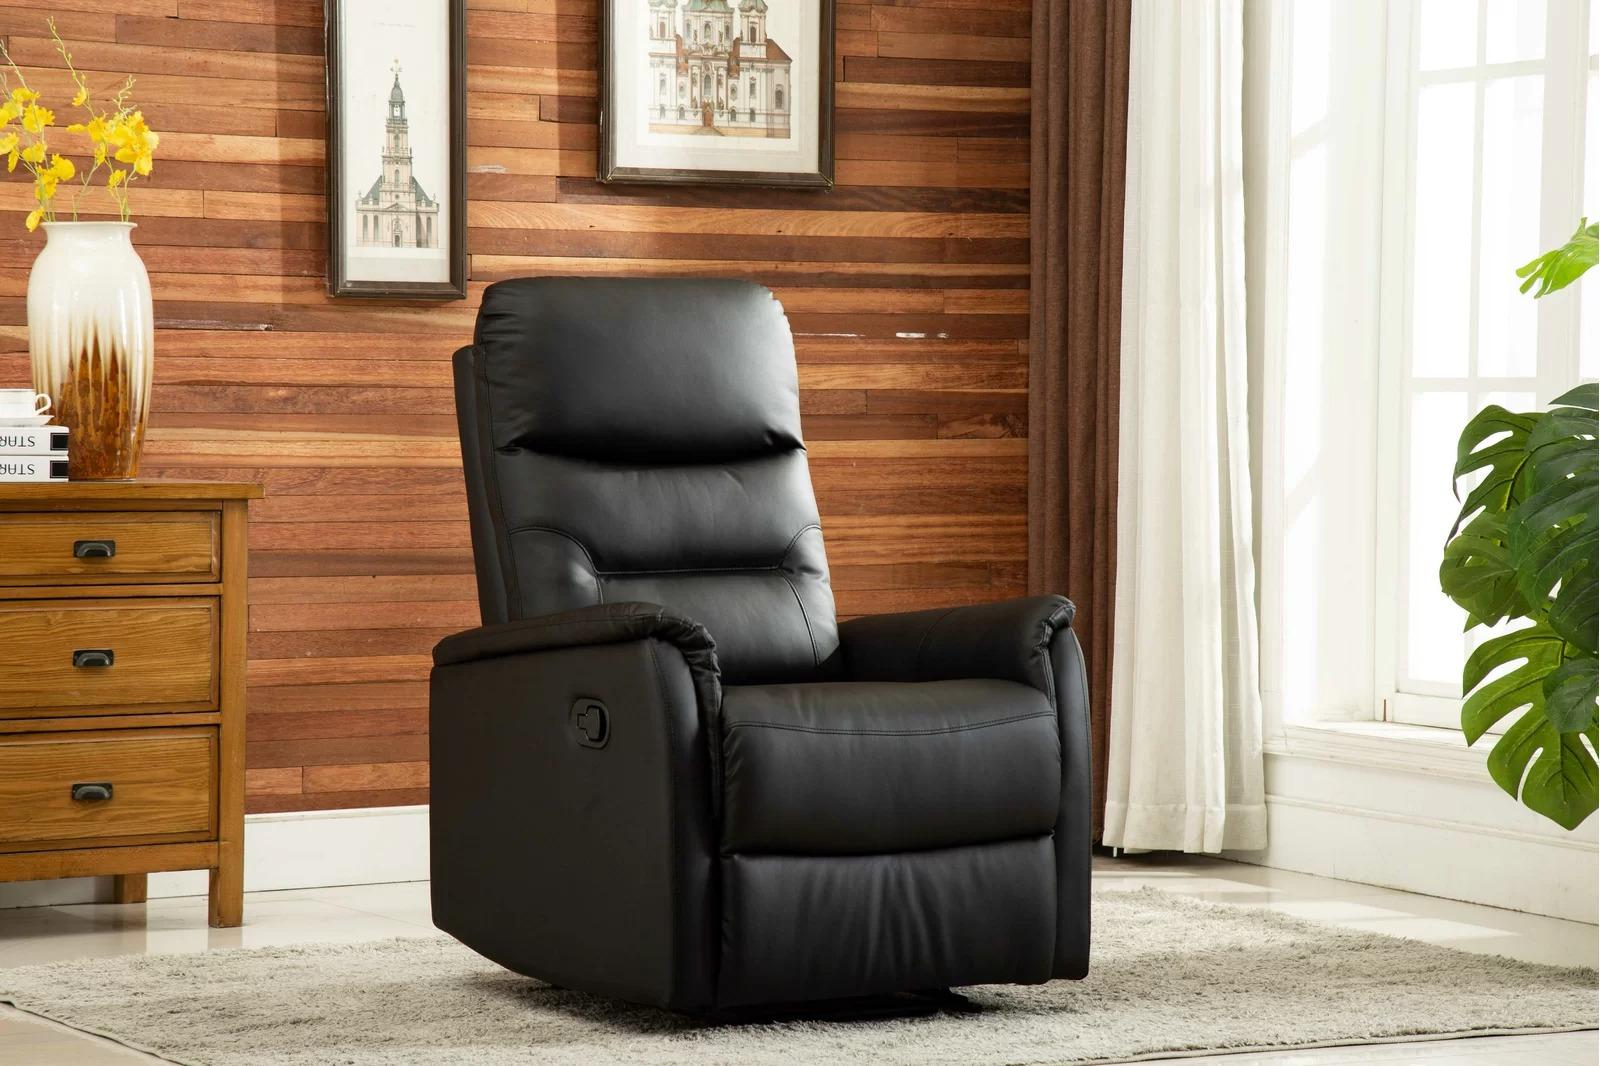 Right now, you can bring home the Maison faux leather recliner for $315.99 instead of $1,019. 45fa835b minarik vegan leather recliner